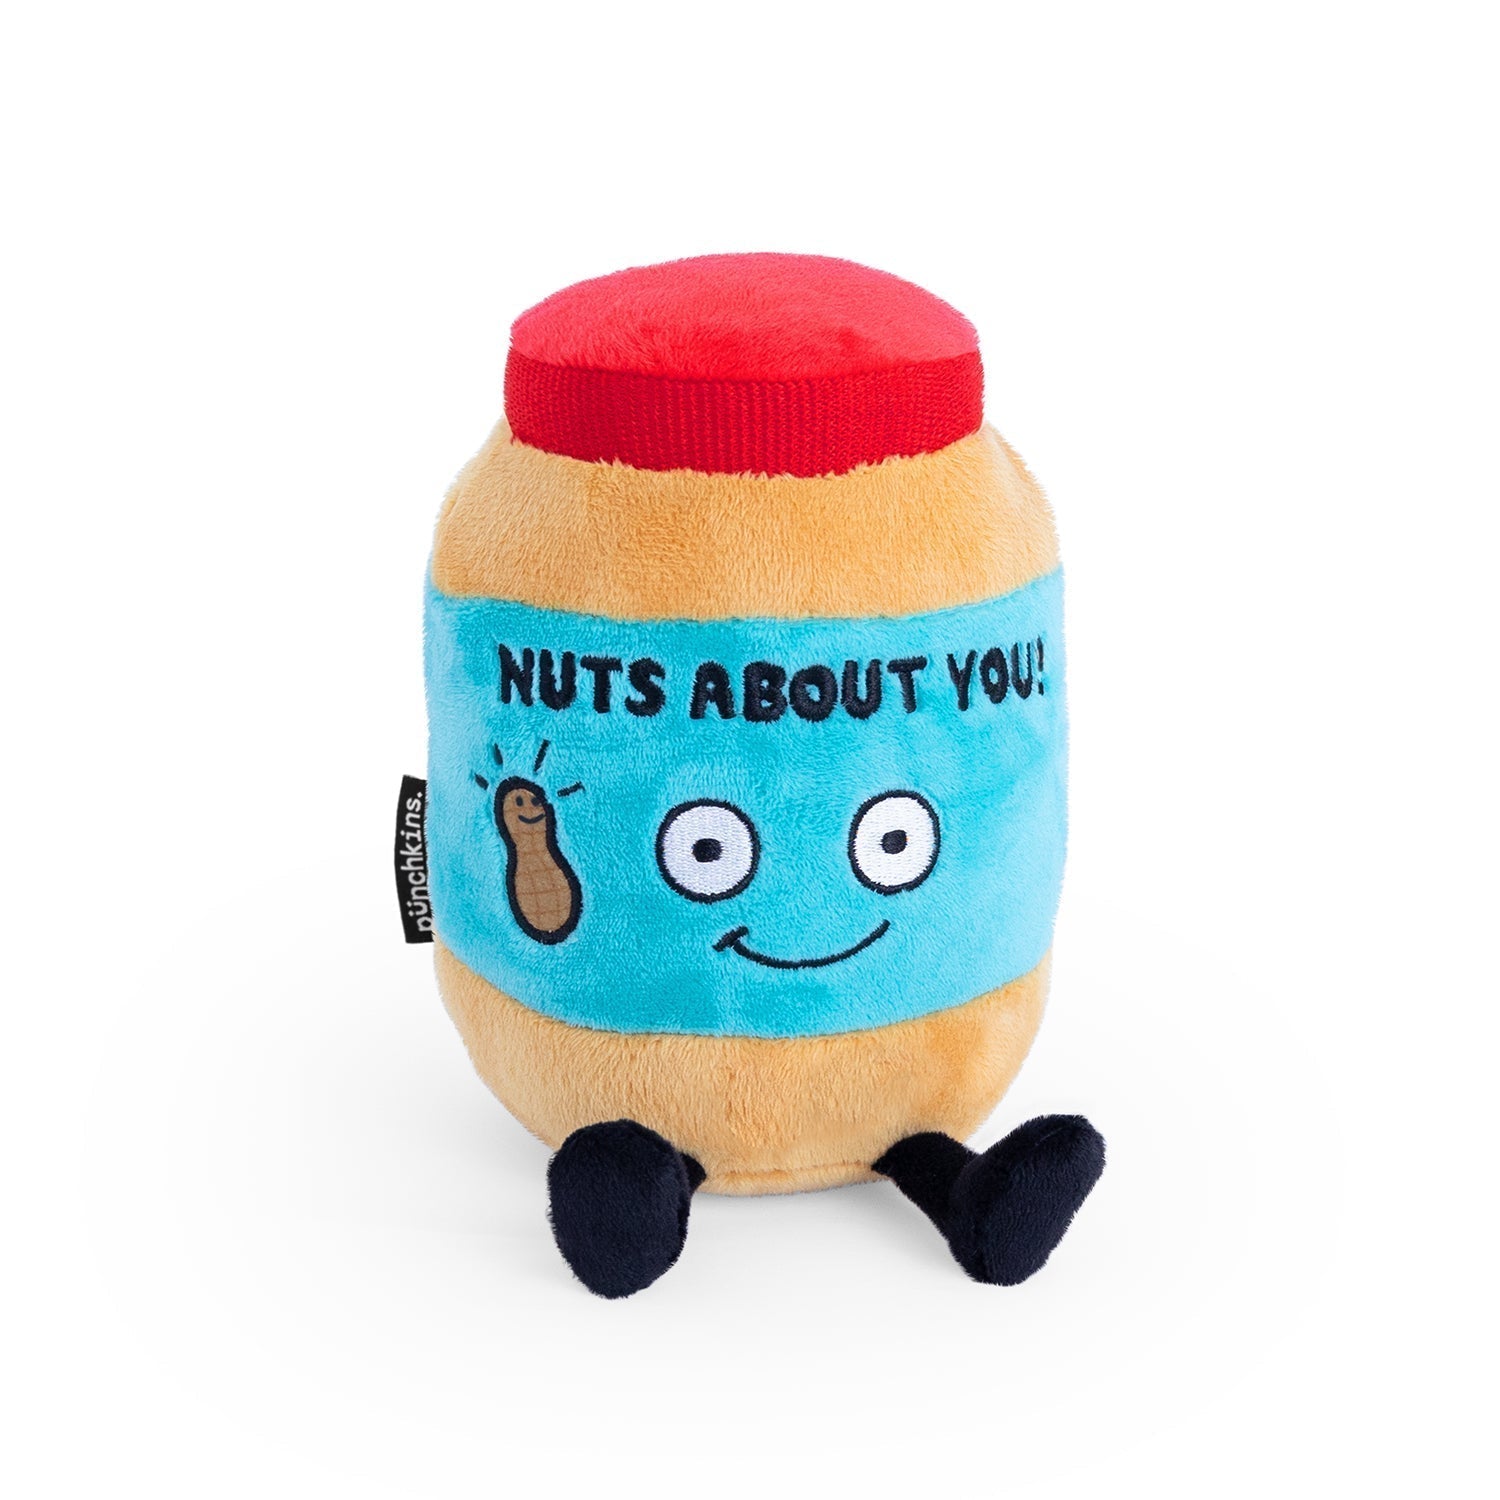 [PRE-ORDER] Peanut Butter Jar – Nuts About You The Plush Kingdom